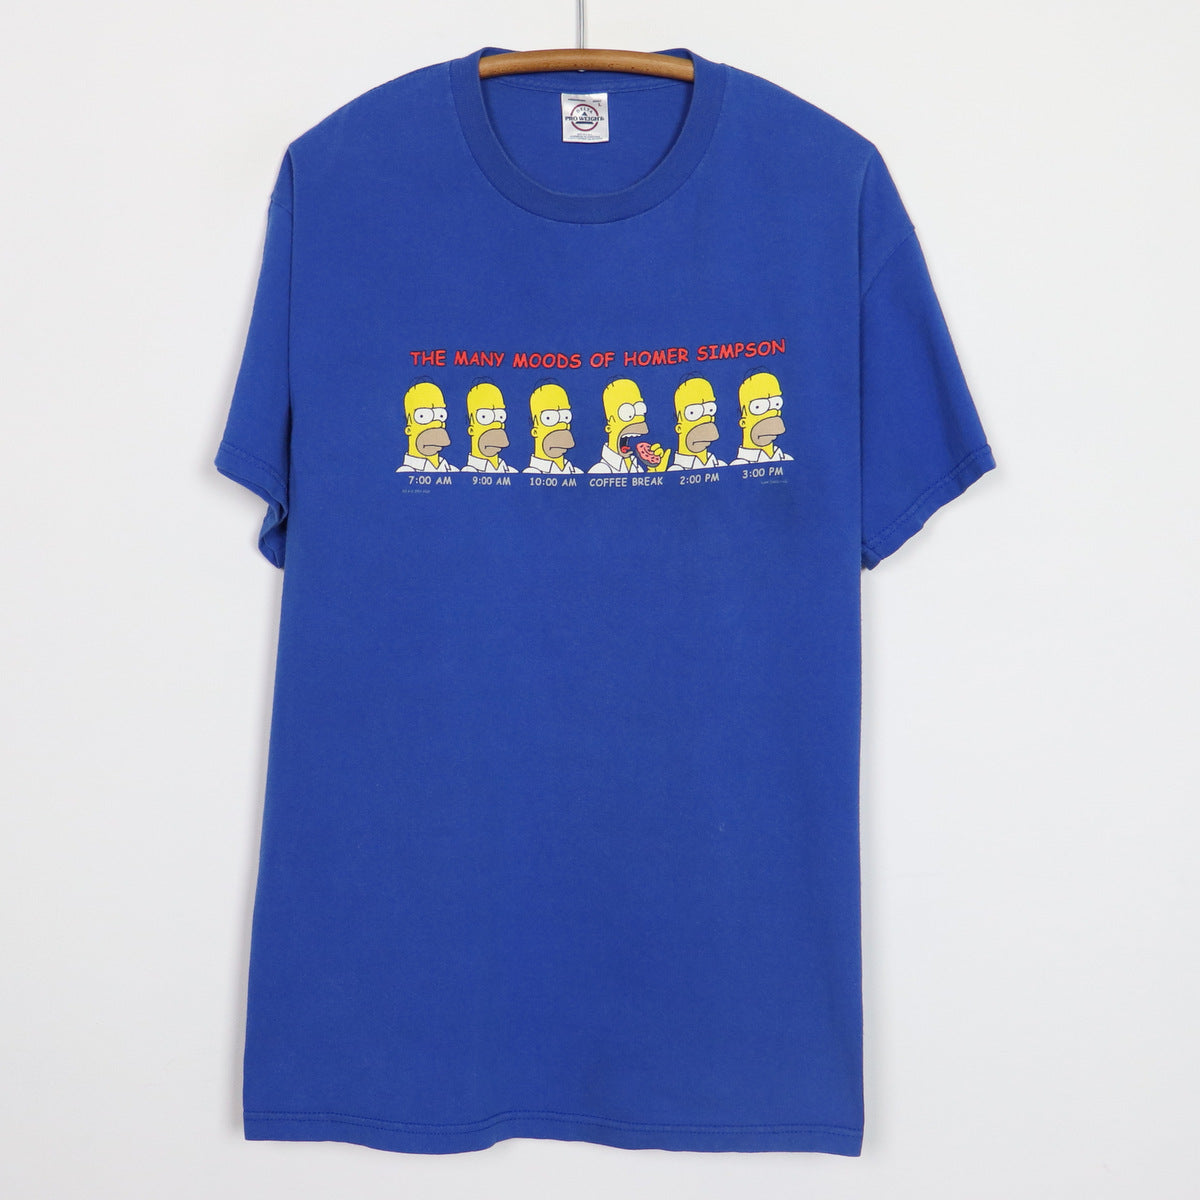 2001 The Simpsons Many Moods Of Homer Simpson Shirt